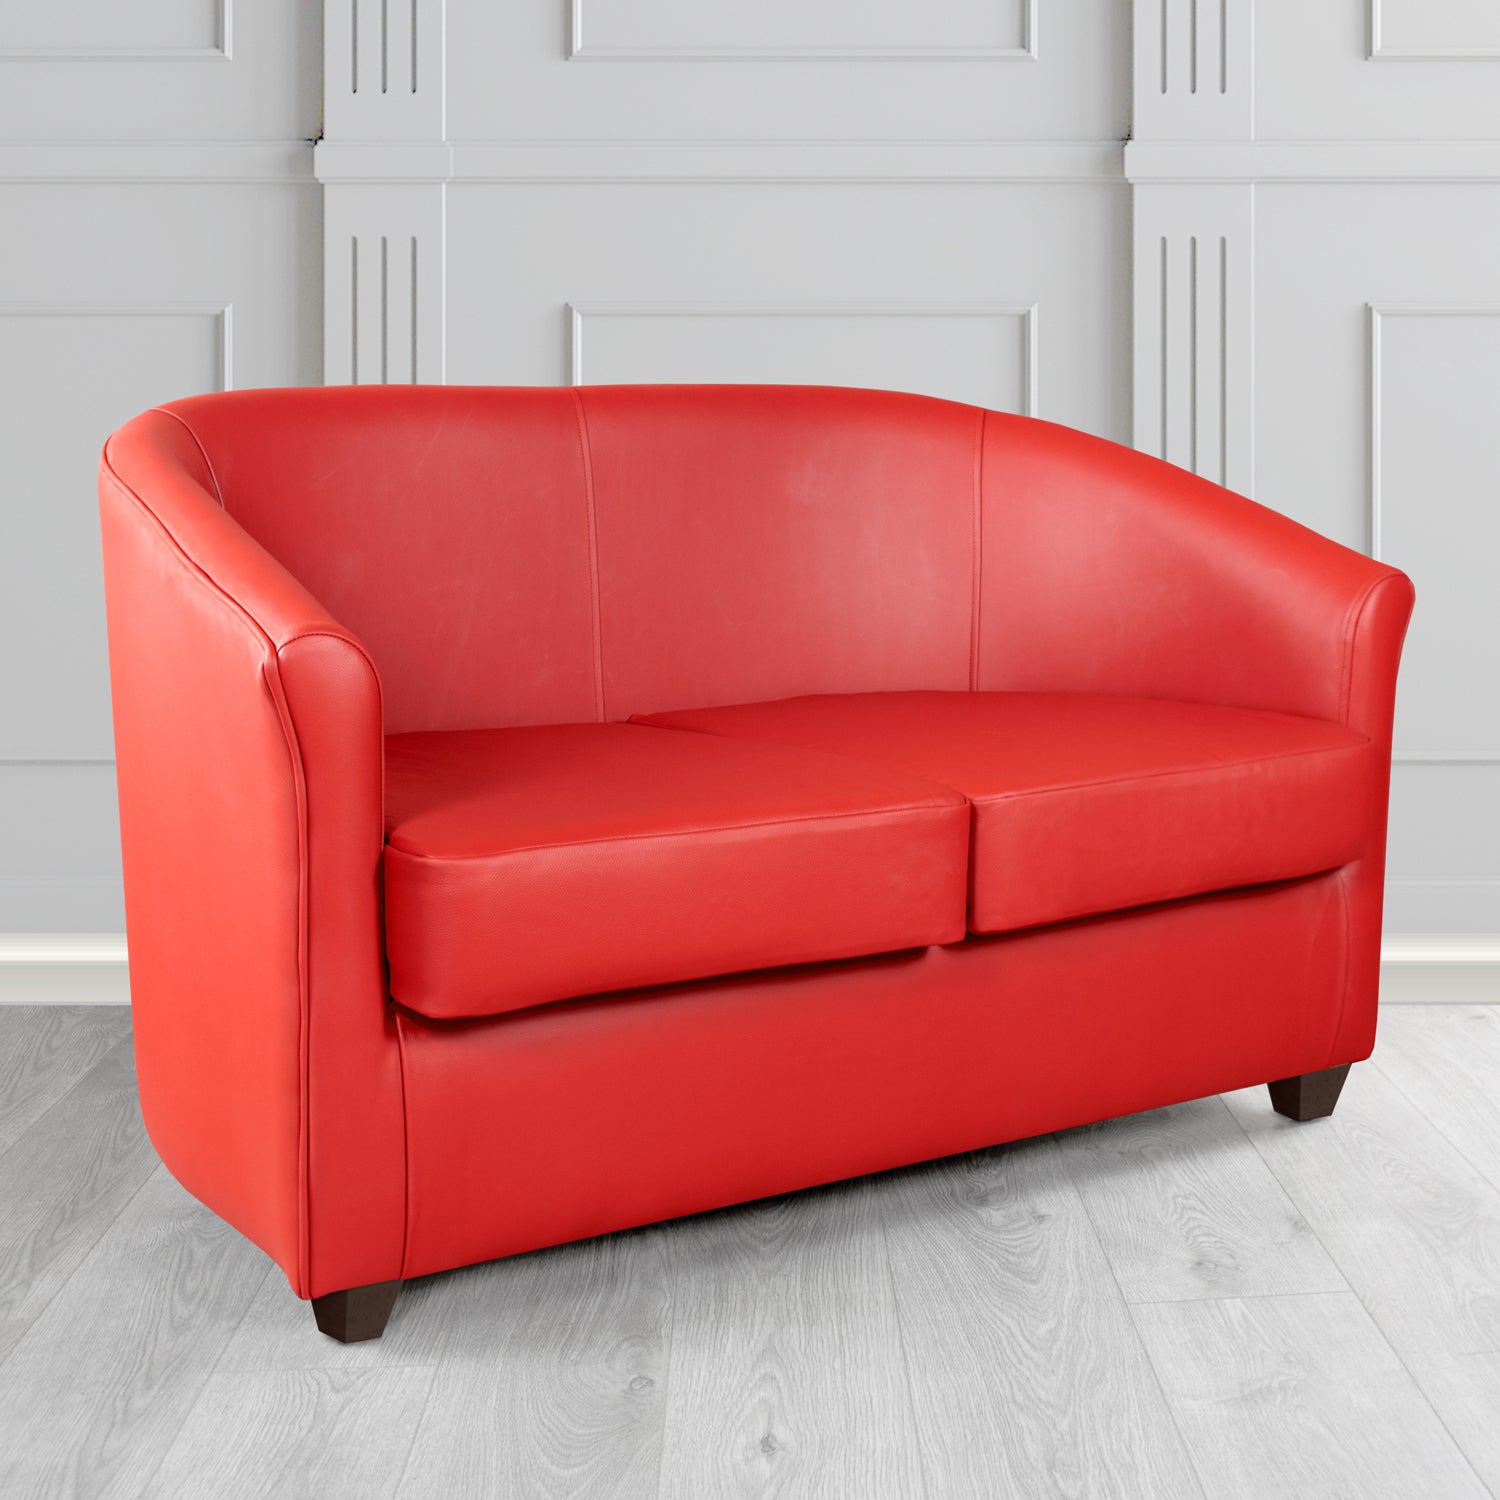 Cannes 2 Seater Tub Sofa in Madrid Rouge Faux Leather - The Tub Chair Shop